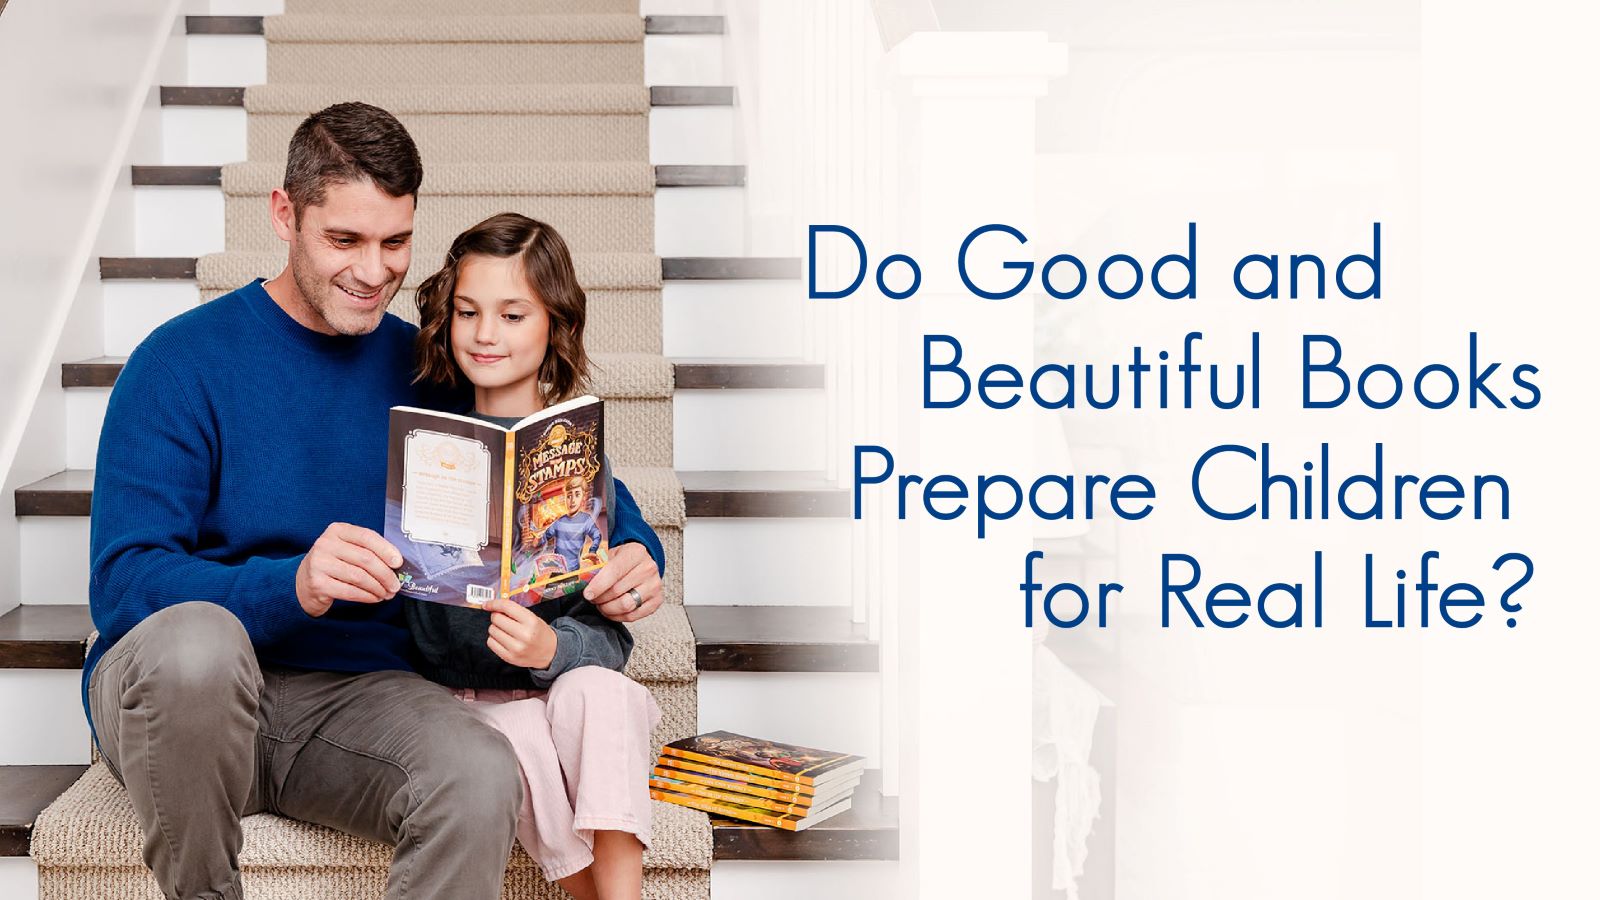 Do Good and Beautiful Books Prepare Children for Real Life?